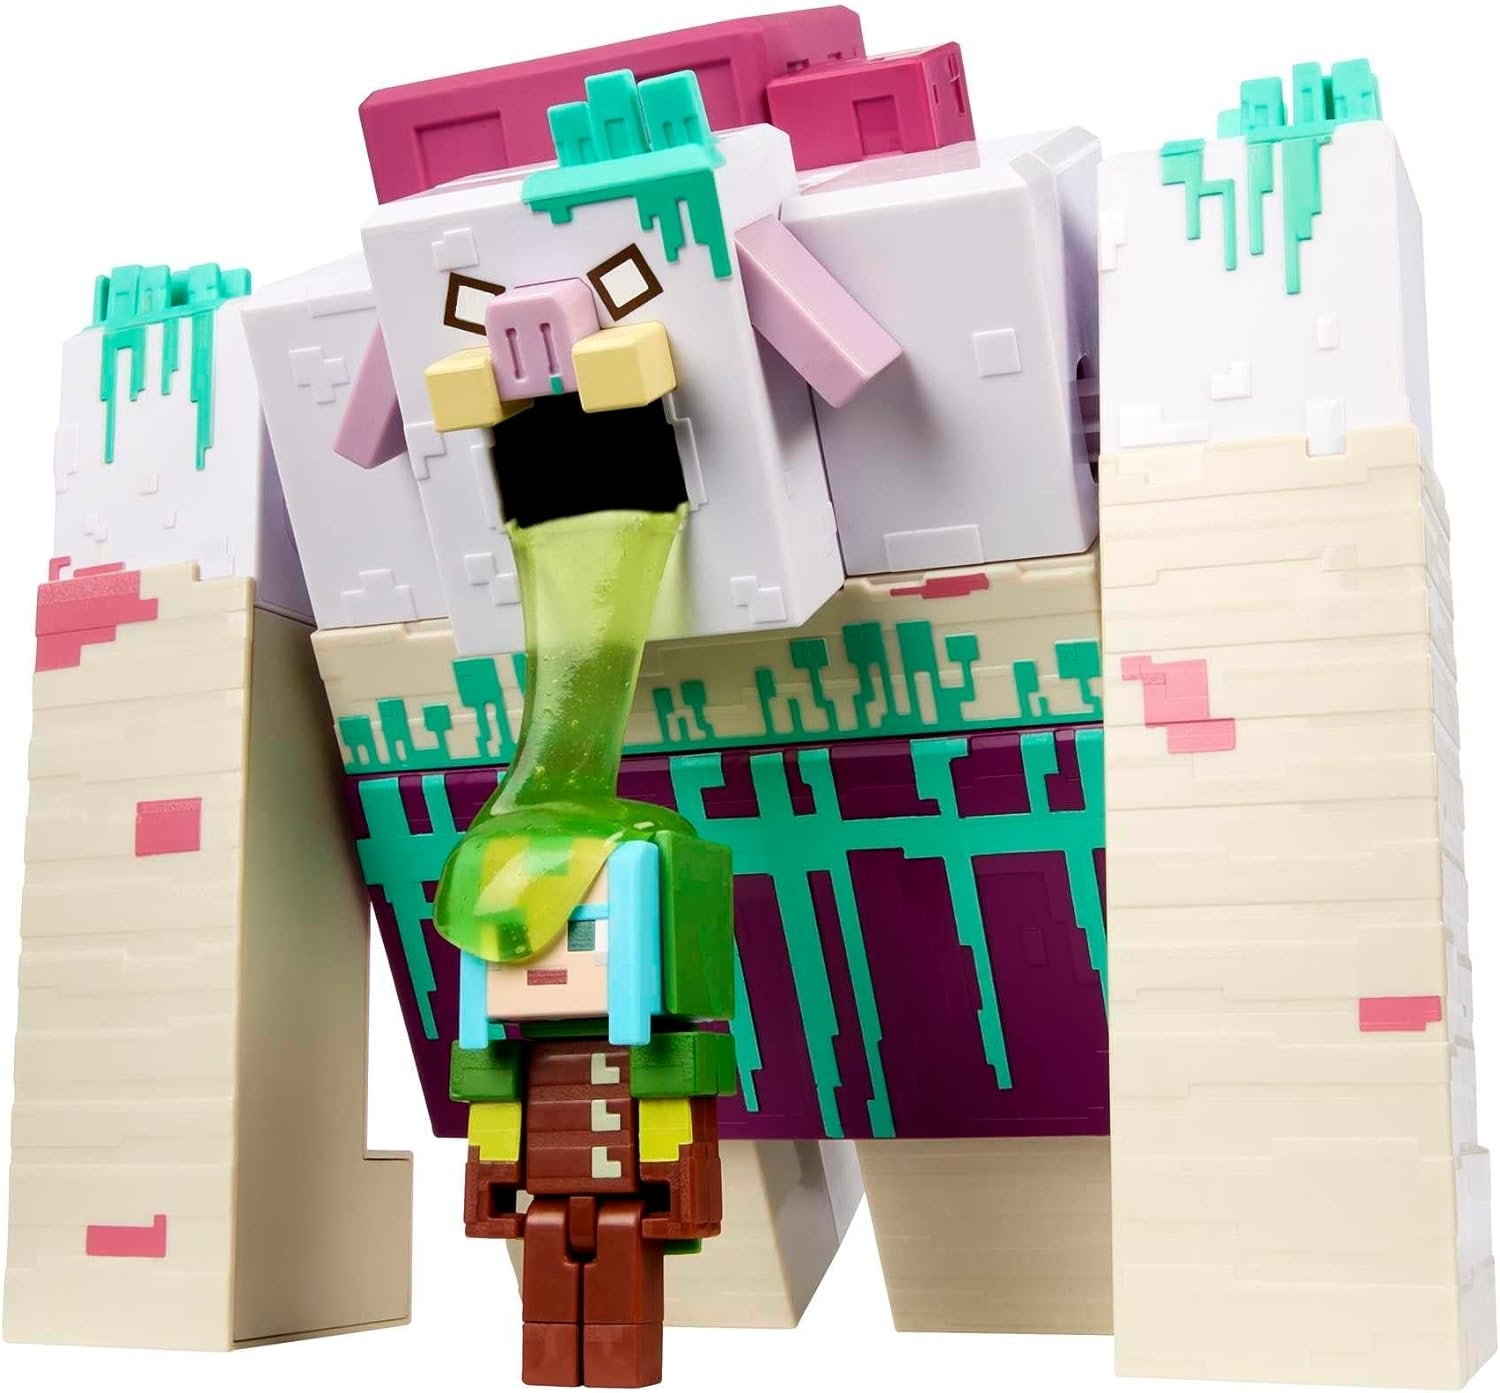 the two minecraft action figures